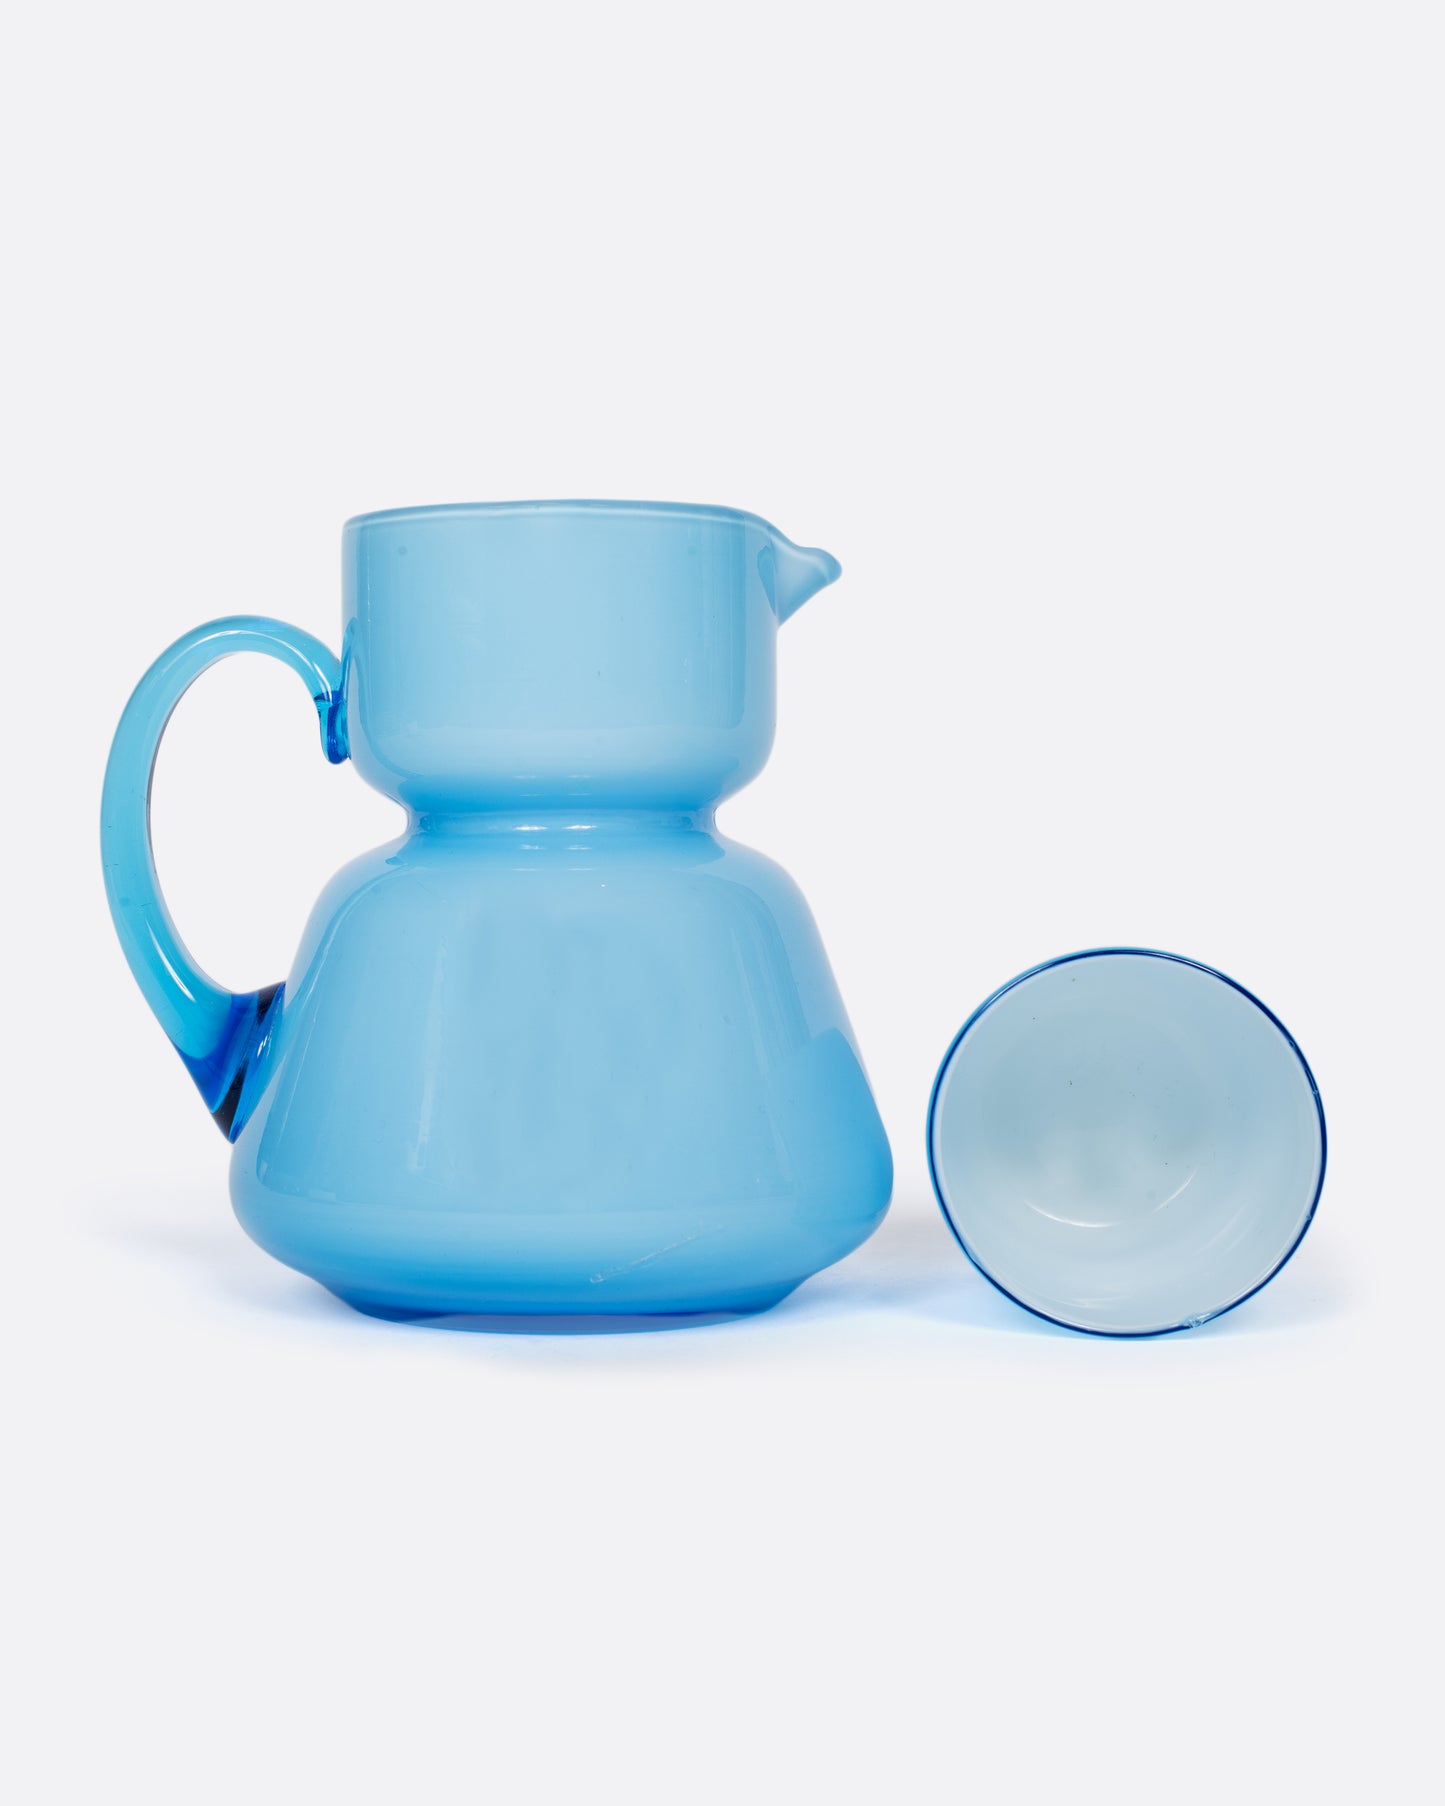 A vintage cased glass cup and creamer with an hourglass shape. Cased glass is made with a layer of white glass underneath creating the velvety, light blue hue.